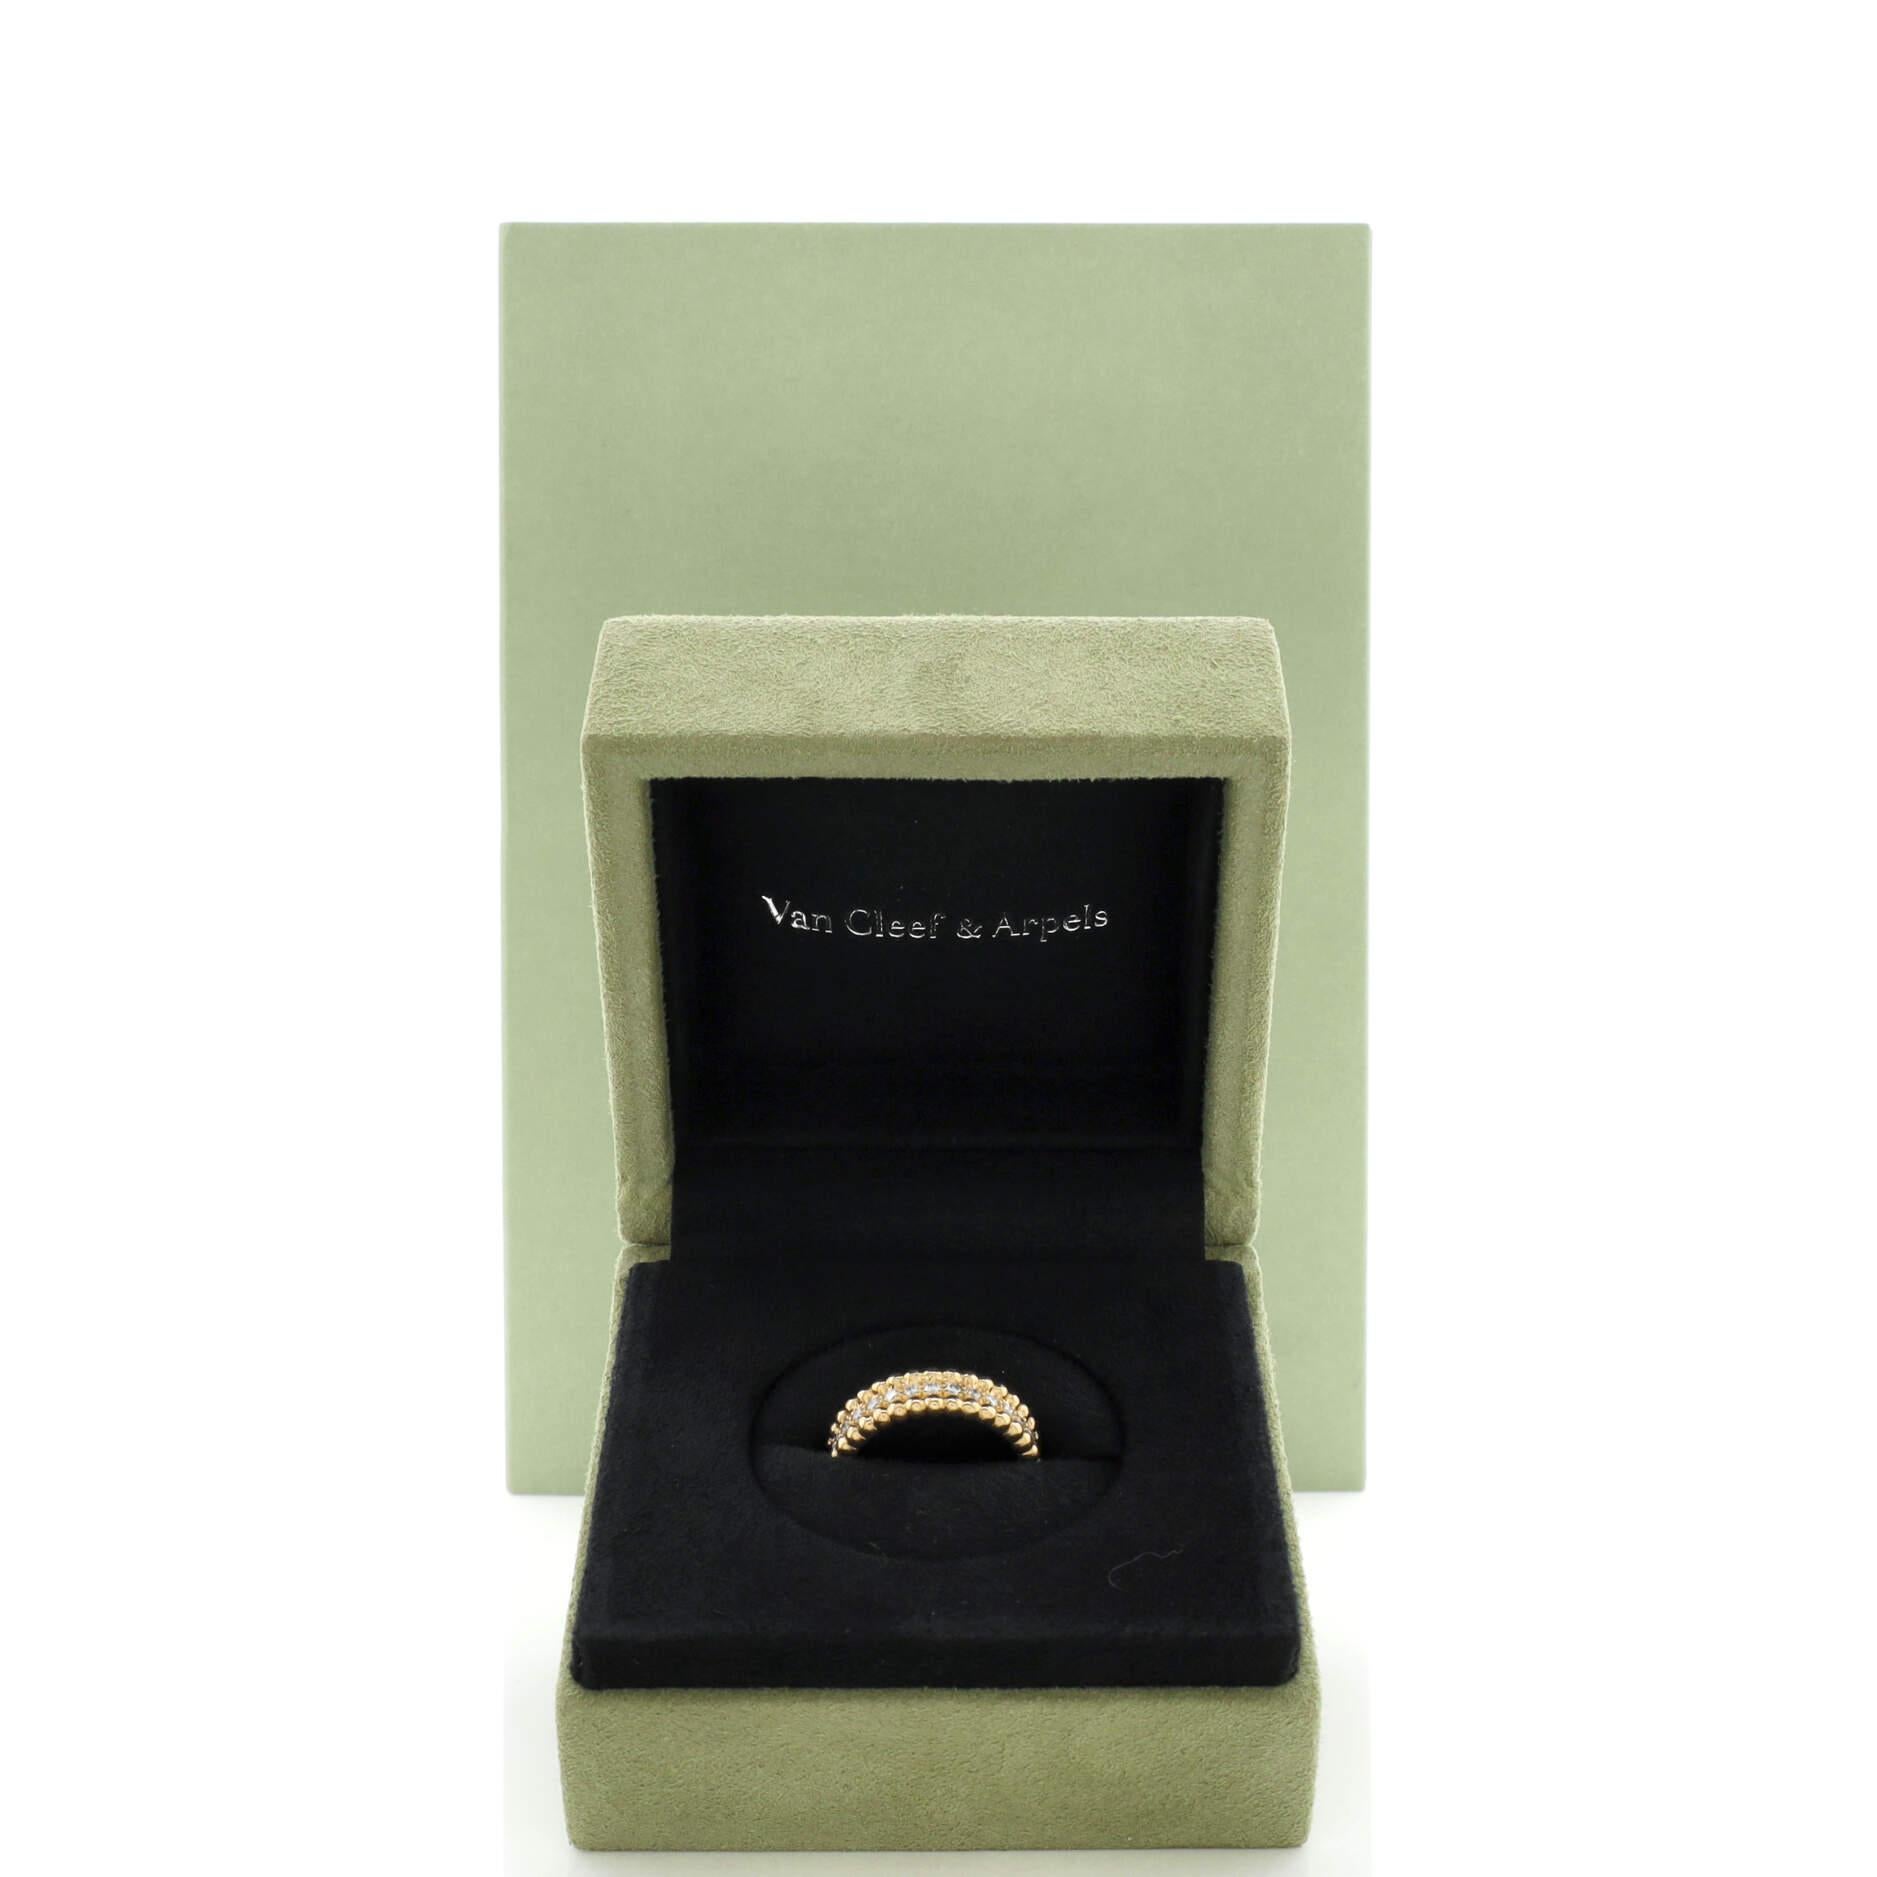 Condition: Good. Moderately heavy wear throughout.
Accessories:
Measurements: Size: 5.25 - 50, Width: 5.60 mm
Designer: Van Cleef & Arpels
Model: Perlee 1 Row Band Ring 18K Yellow Gold and Diamonds
Exterior Color: Yellow Gold
Item Number: 234016/1